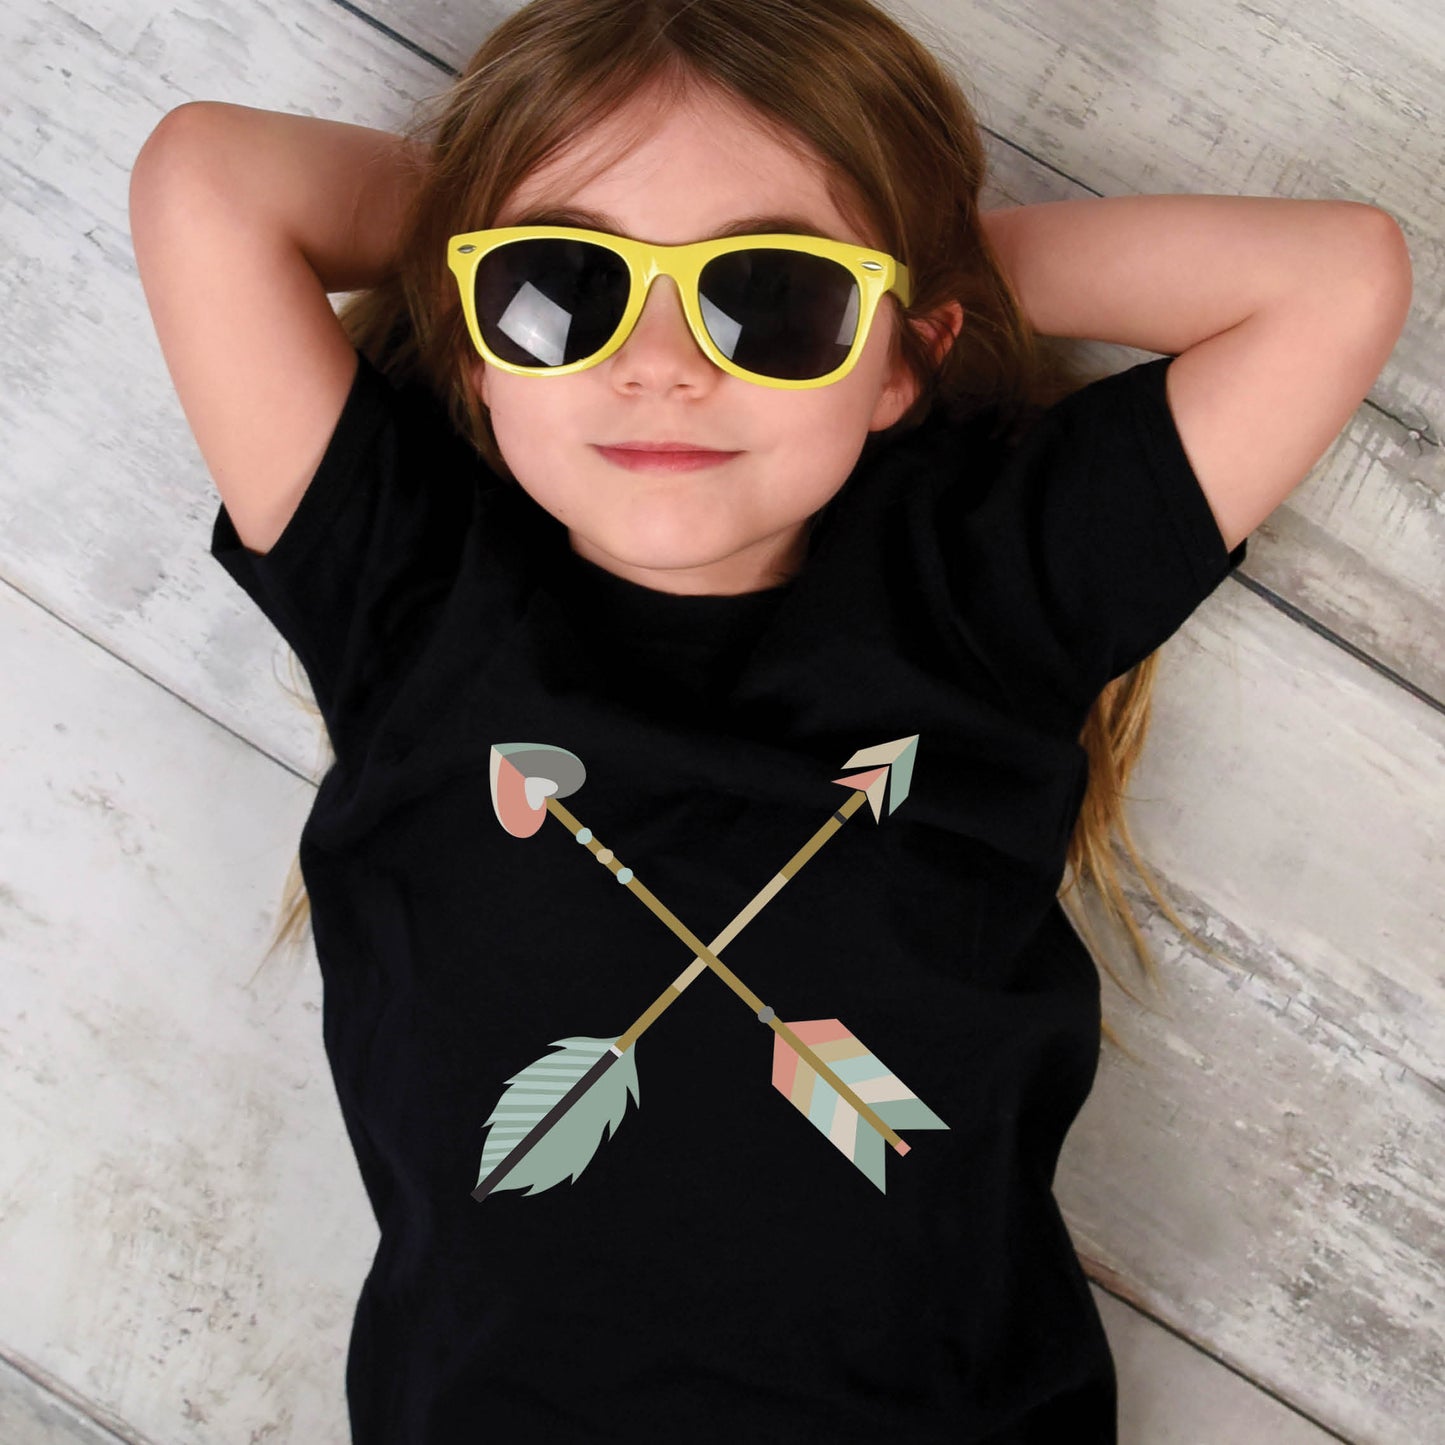 Funny young girl with yellow sunglasses wearing a black Youth size t-shirt with teal blue and dusty pink pastel criss-cross boho arrows, one with a heart on the end, to match Christian homeschool mom's / women's "Raising Arrows" Psalm 127:4-5 bible verse t-shirt for boys and girls